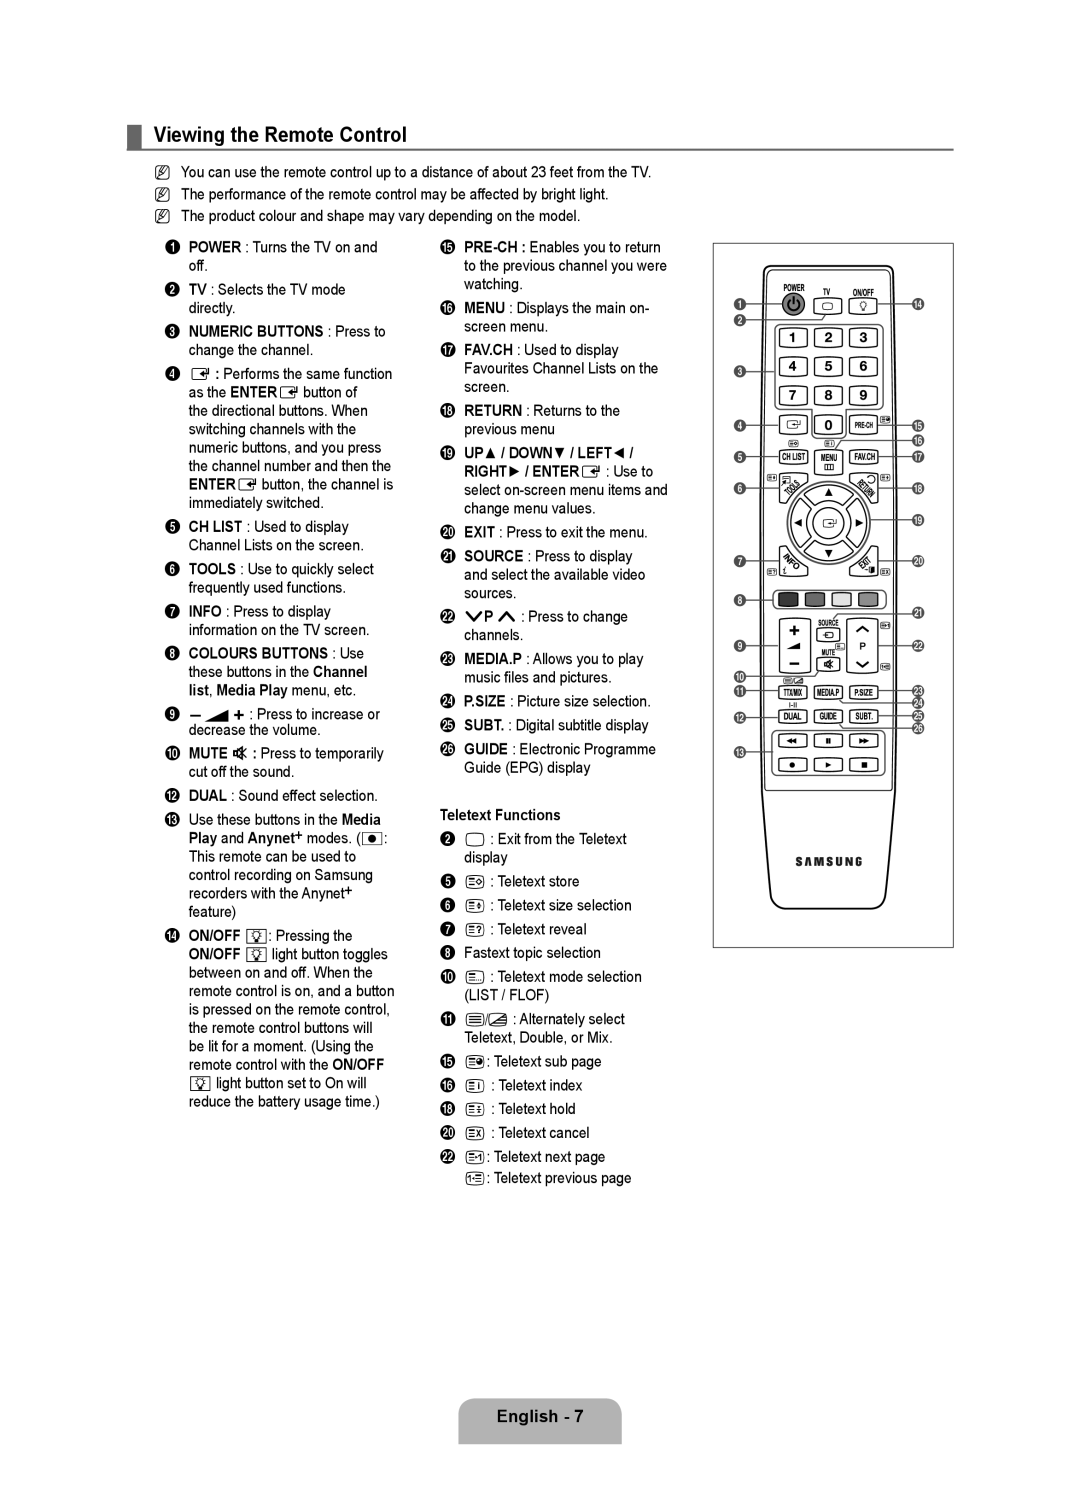 Samsung UE40B6000VWXUA manual Viewing the Remote Control, English - , NUMERIC BUTTONS Press to change the channel 